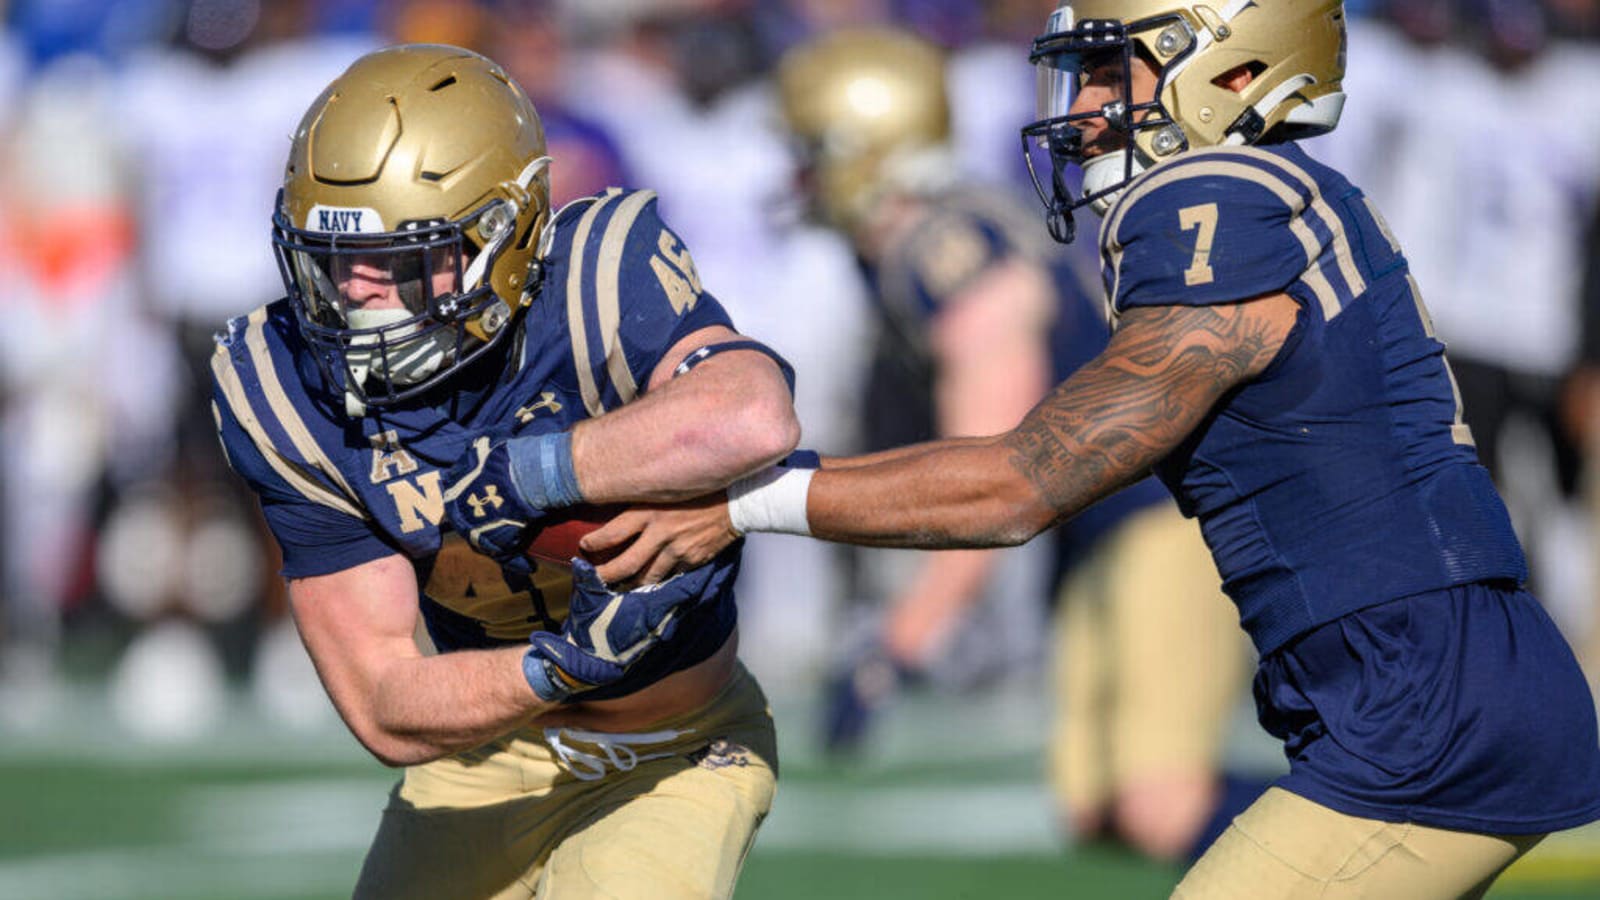 How to watch Army vs Navy Game 2023 via free live streaming today: College Football online, start time, stats, and TV channel